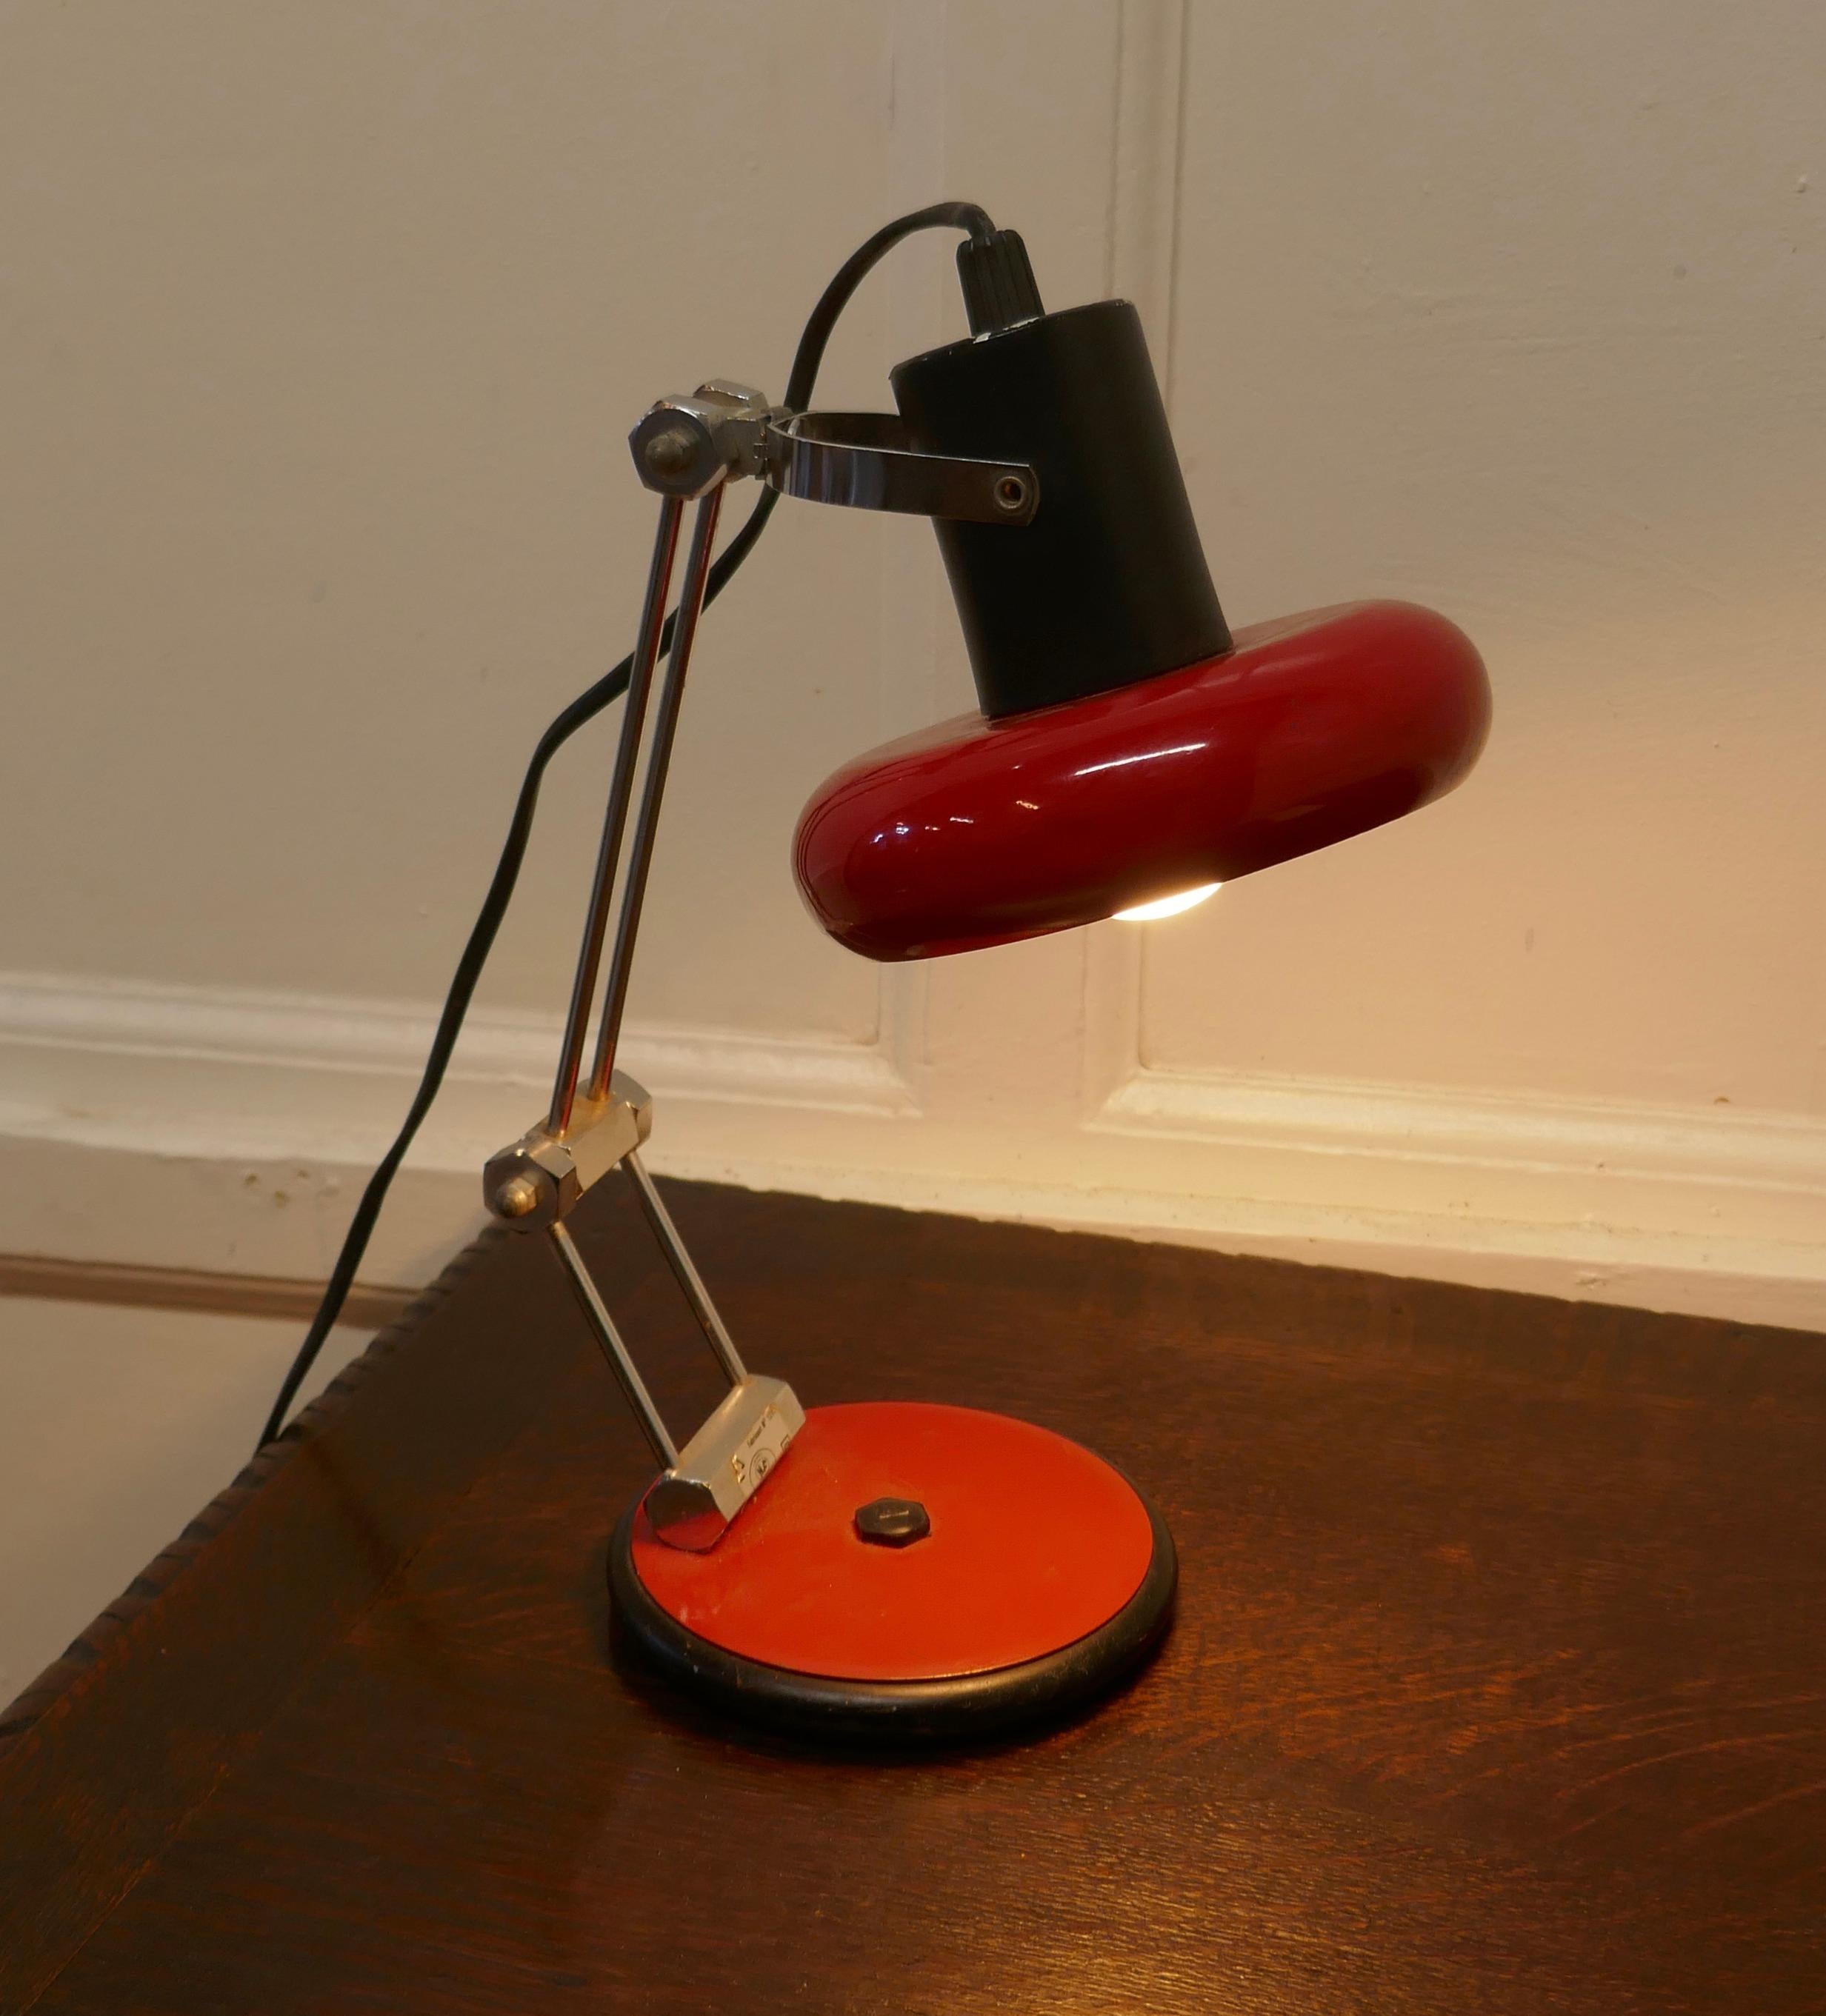 French Retro Sputnik angle table lamp

Very stylish statement piece in red, with a round shade which can be angled a little to suit 
Measures: The lamp is 13” tall, and 9” in diameter
WD52.